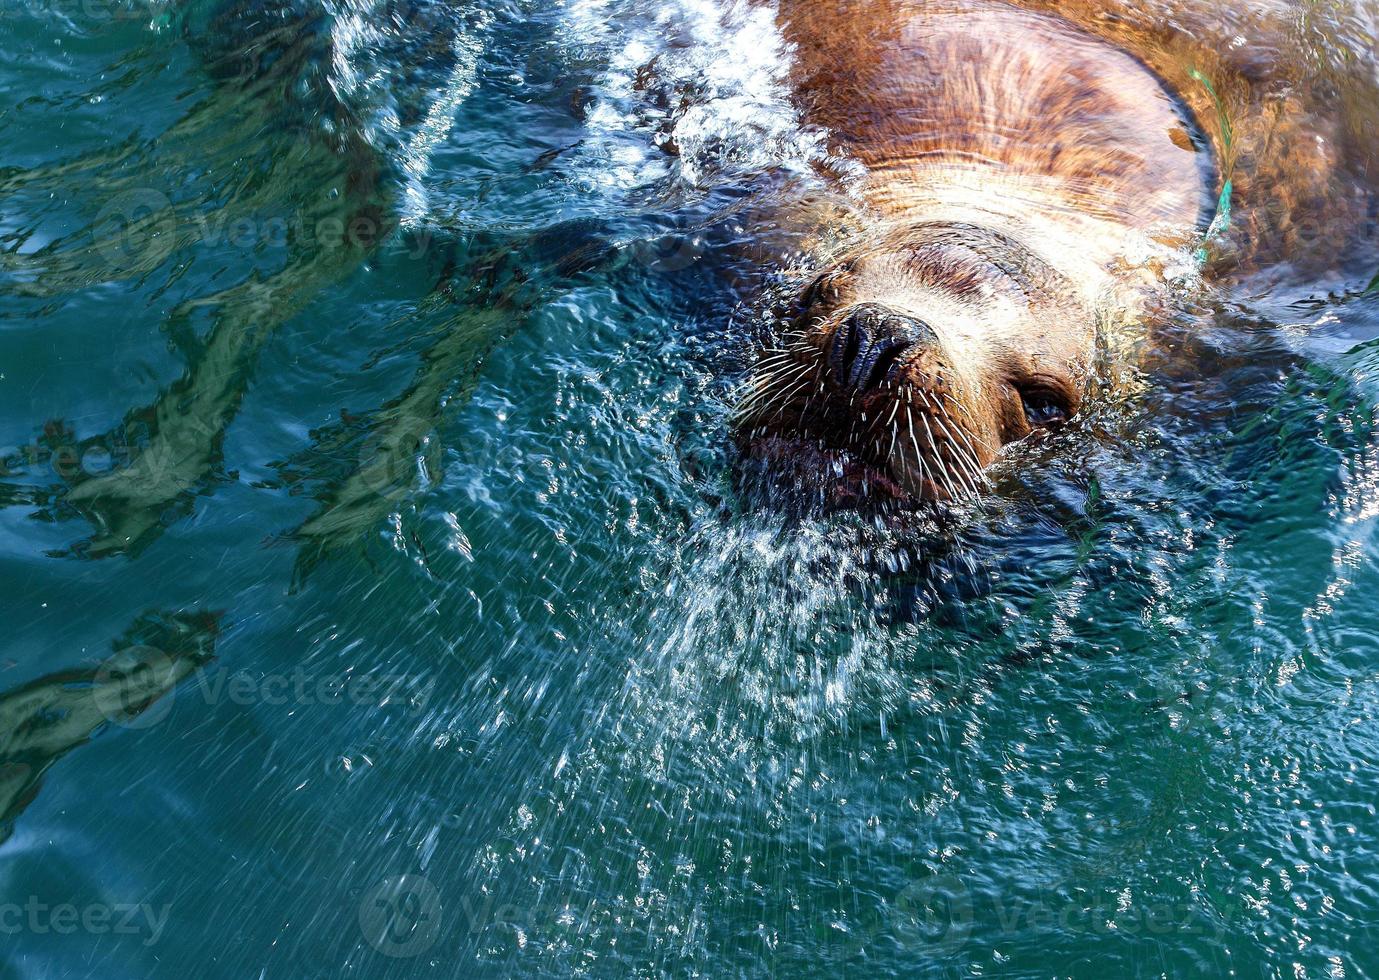 Steller sea lion in the water of Avacha Bay in Kamchatka. photo